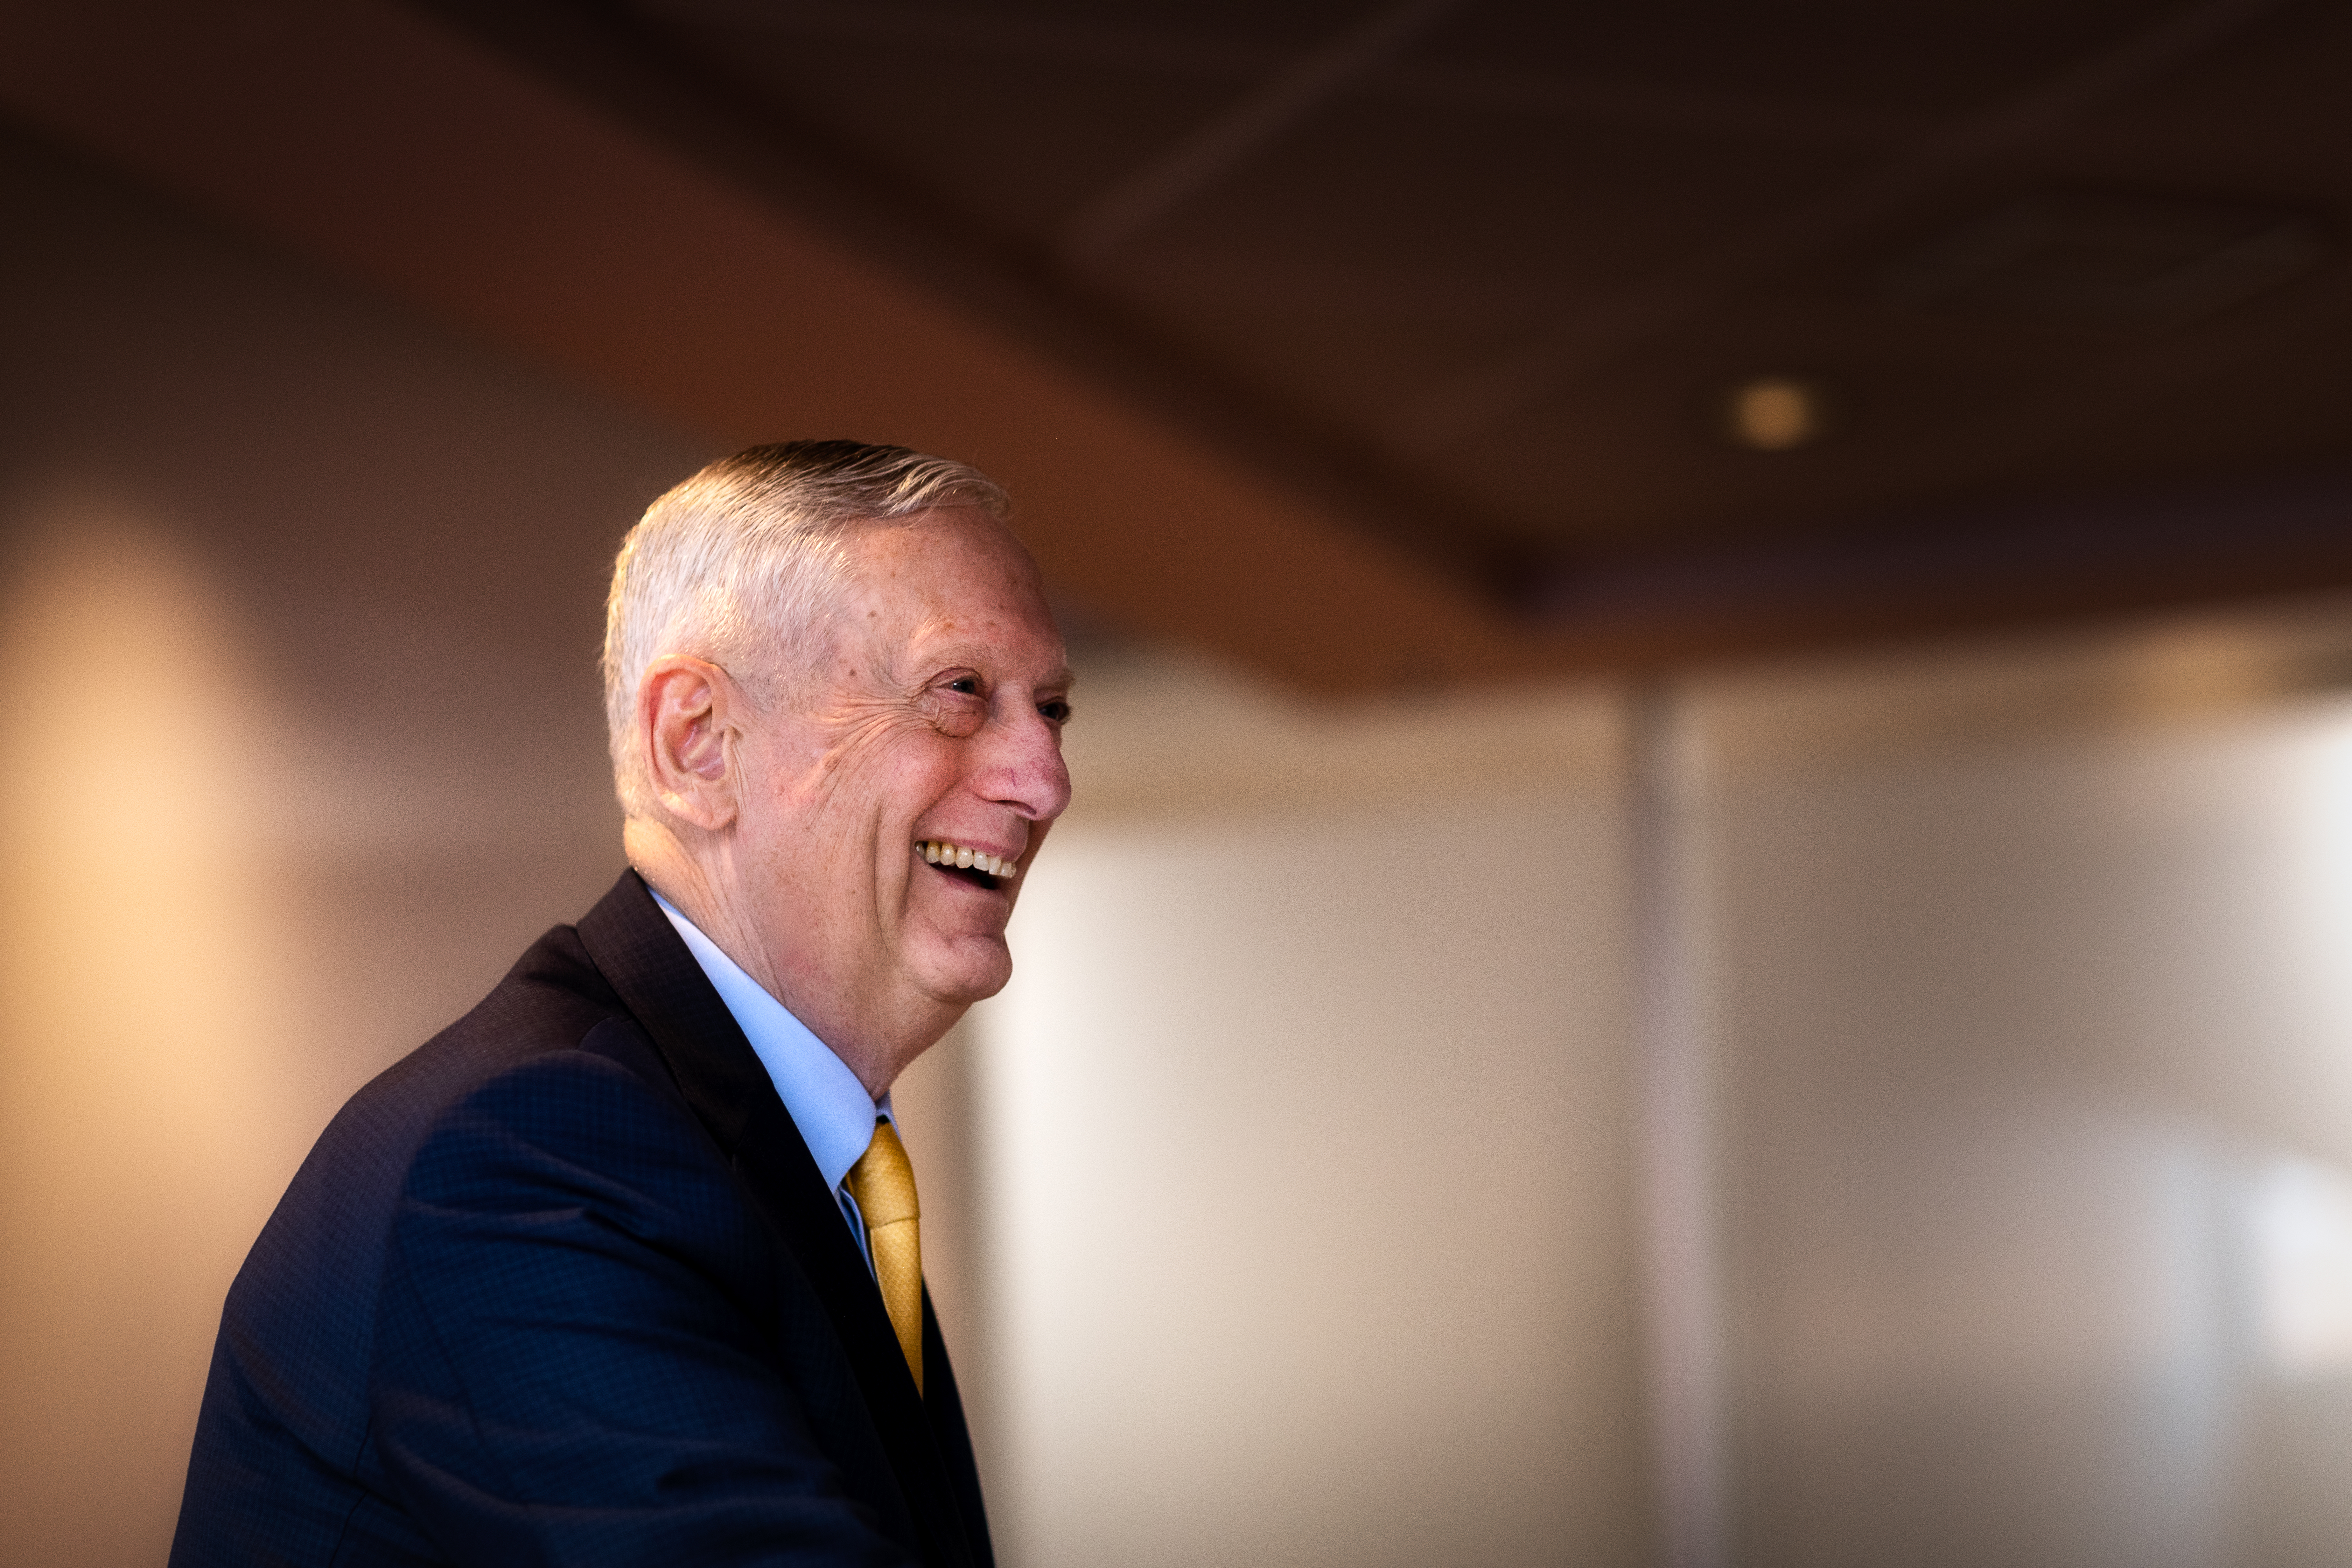 Jim Mattis smiles. He is wearing a suit and yellow tie.